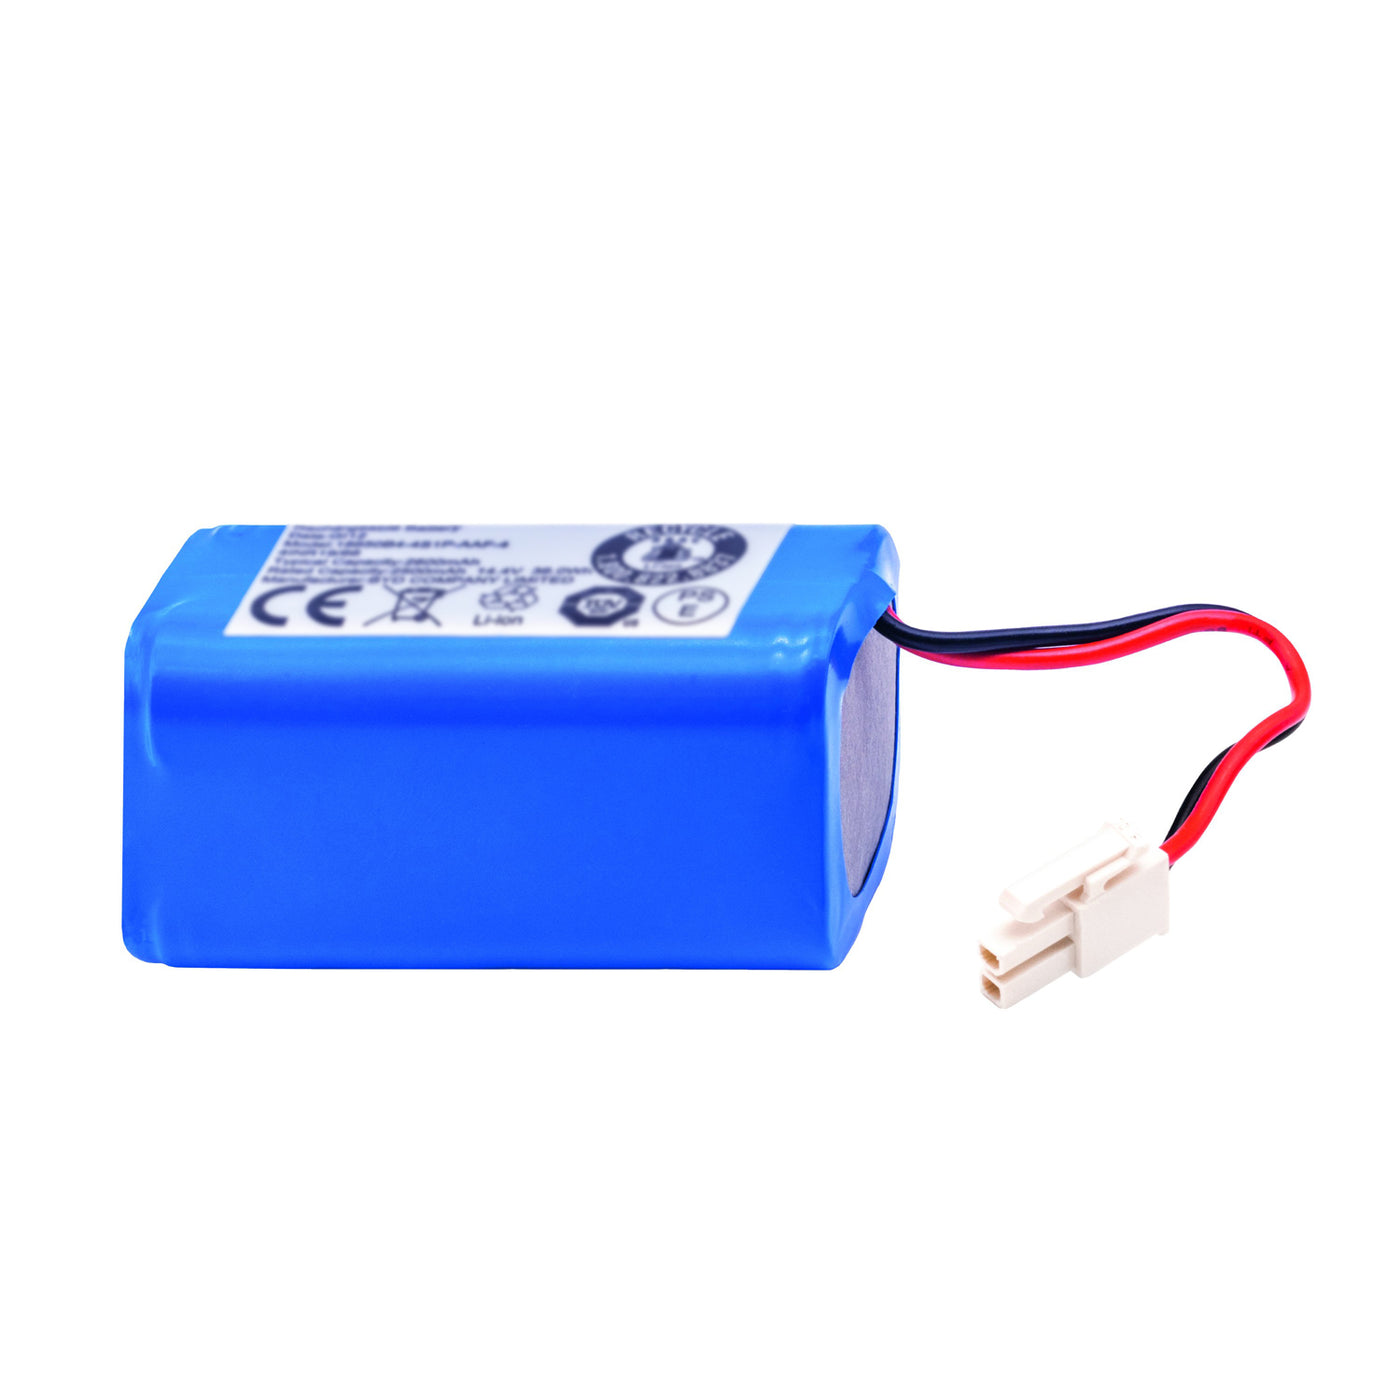 ZACO replacement battery for A10 and W450